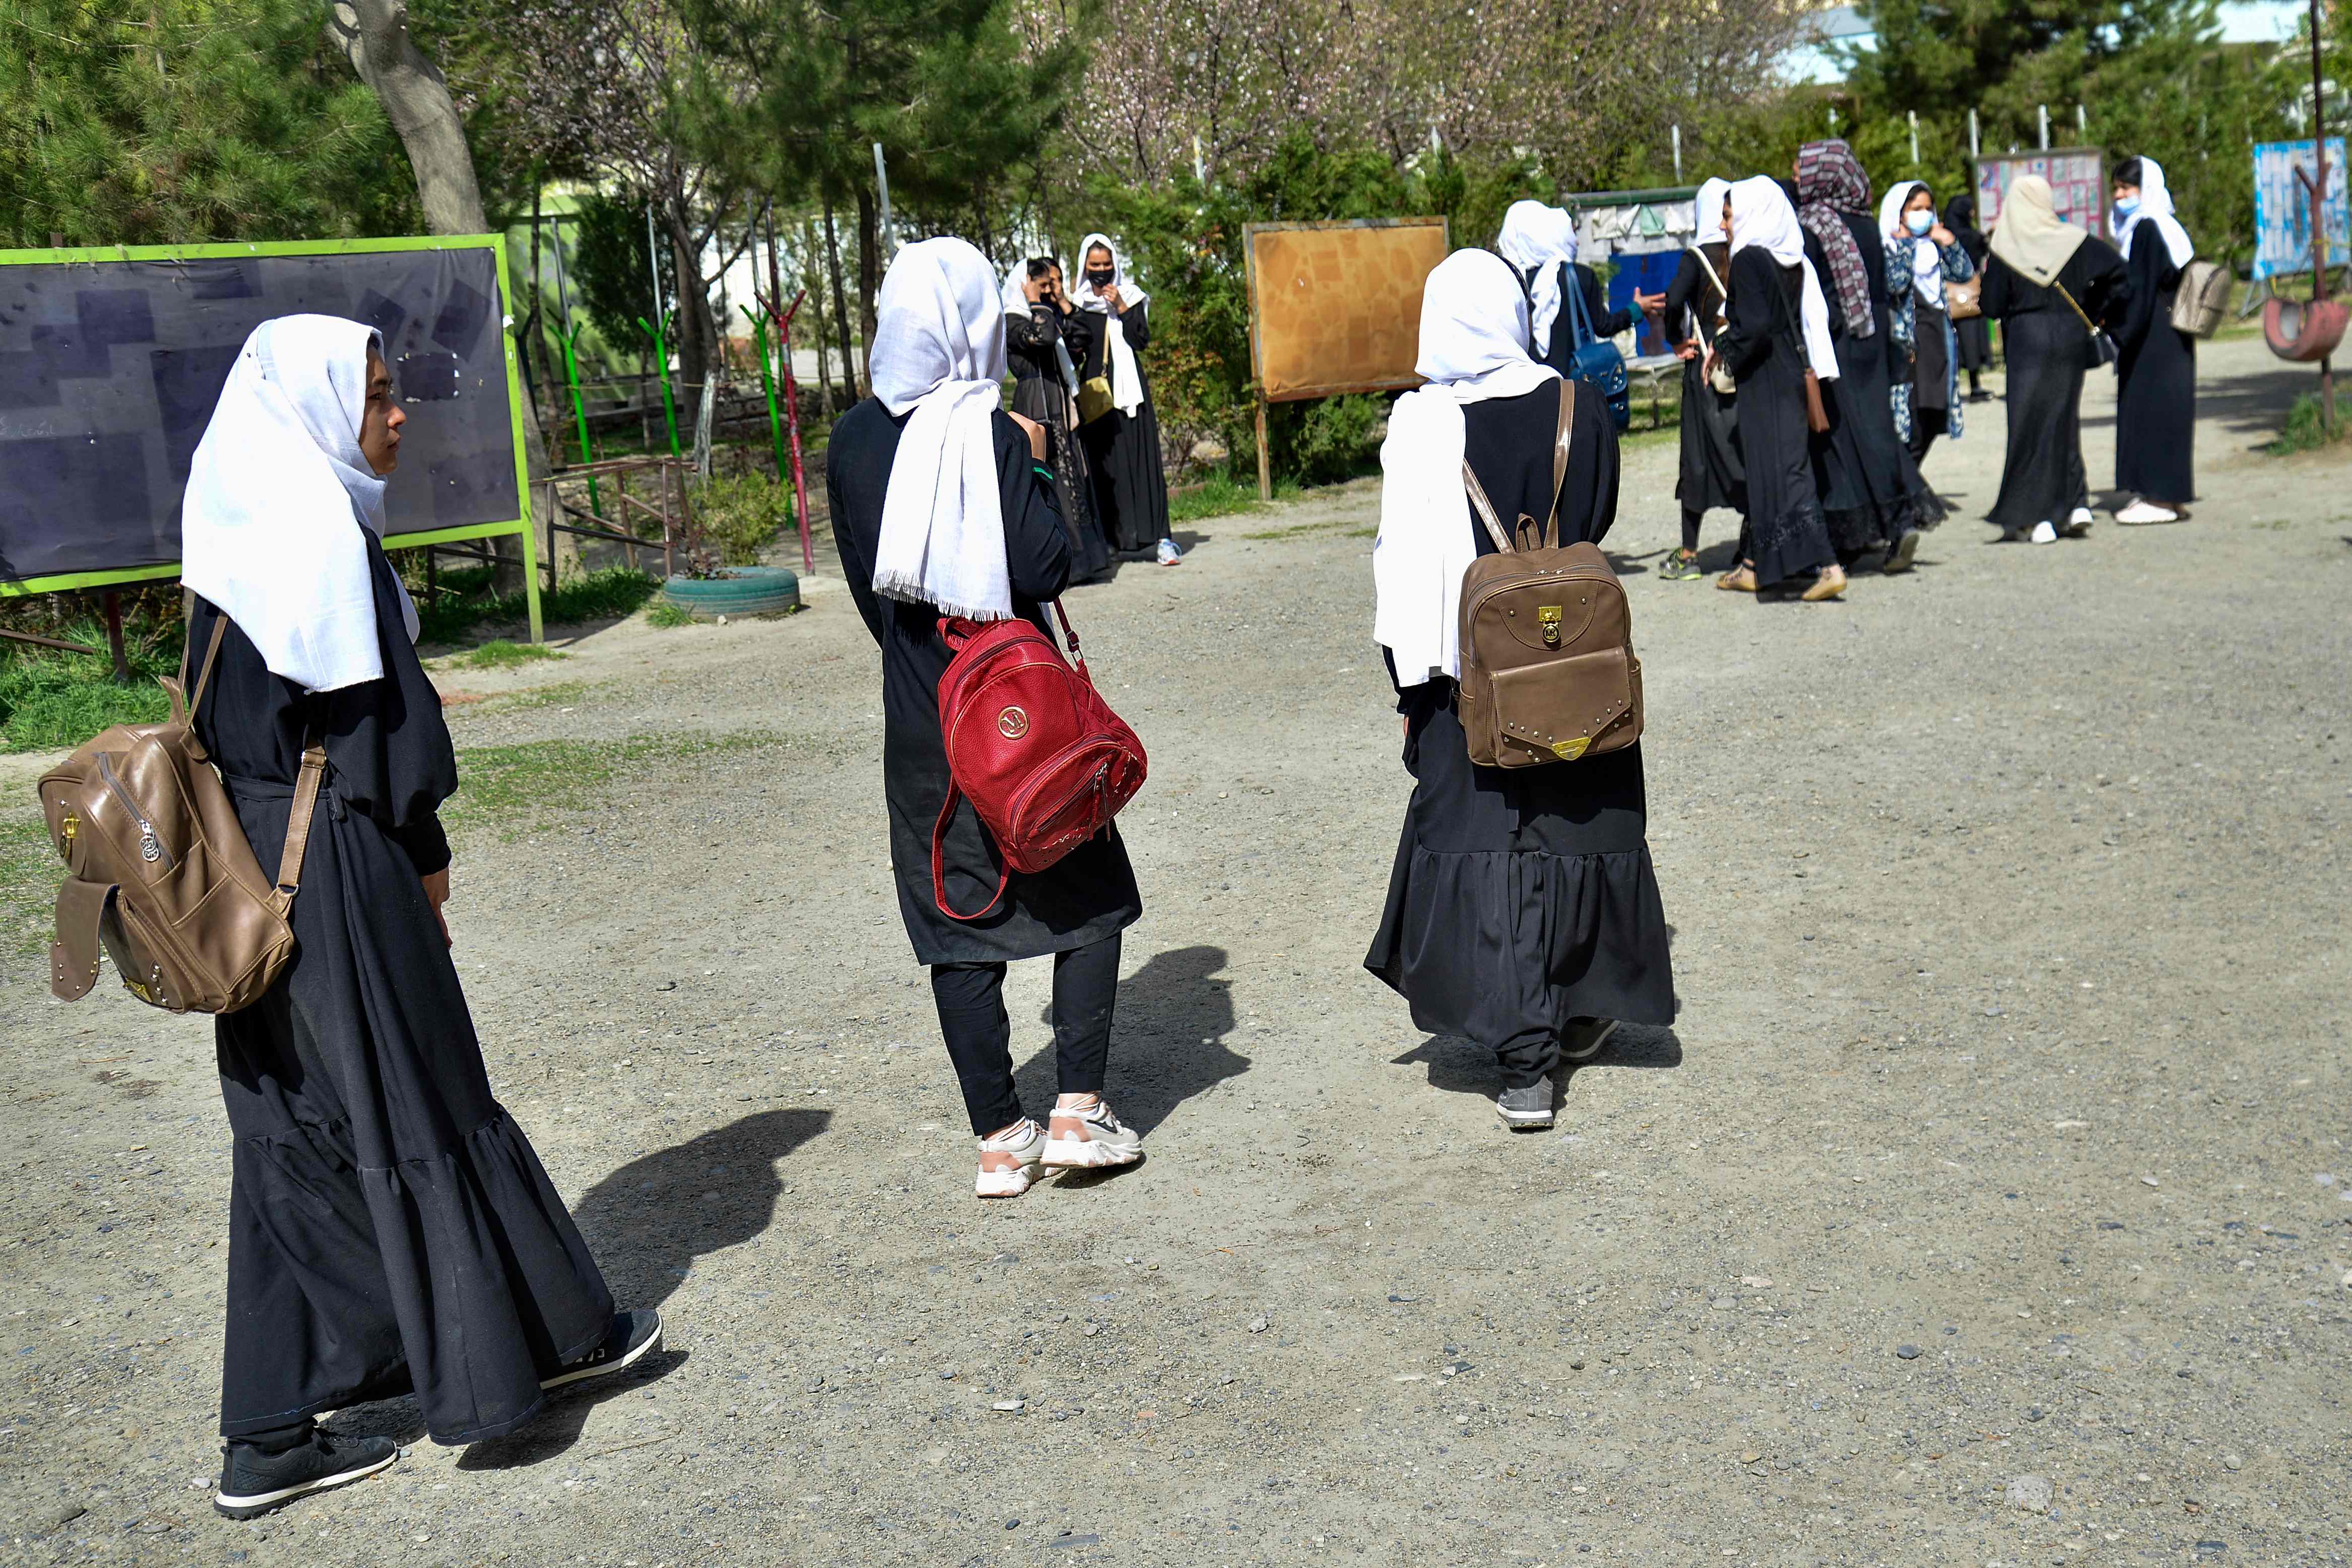 Xx 12yars Hd Video - Taliban renege on promise to open high schools to girls in Afghanistan